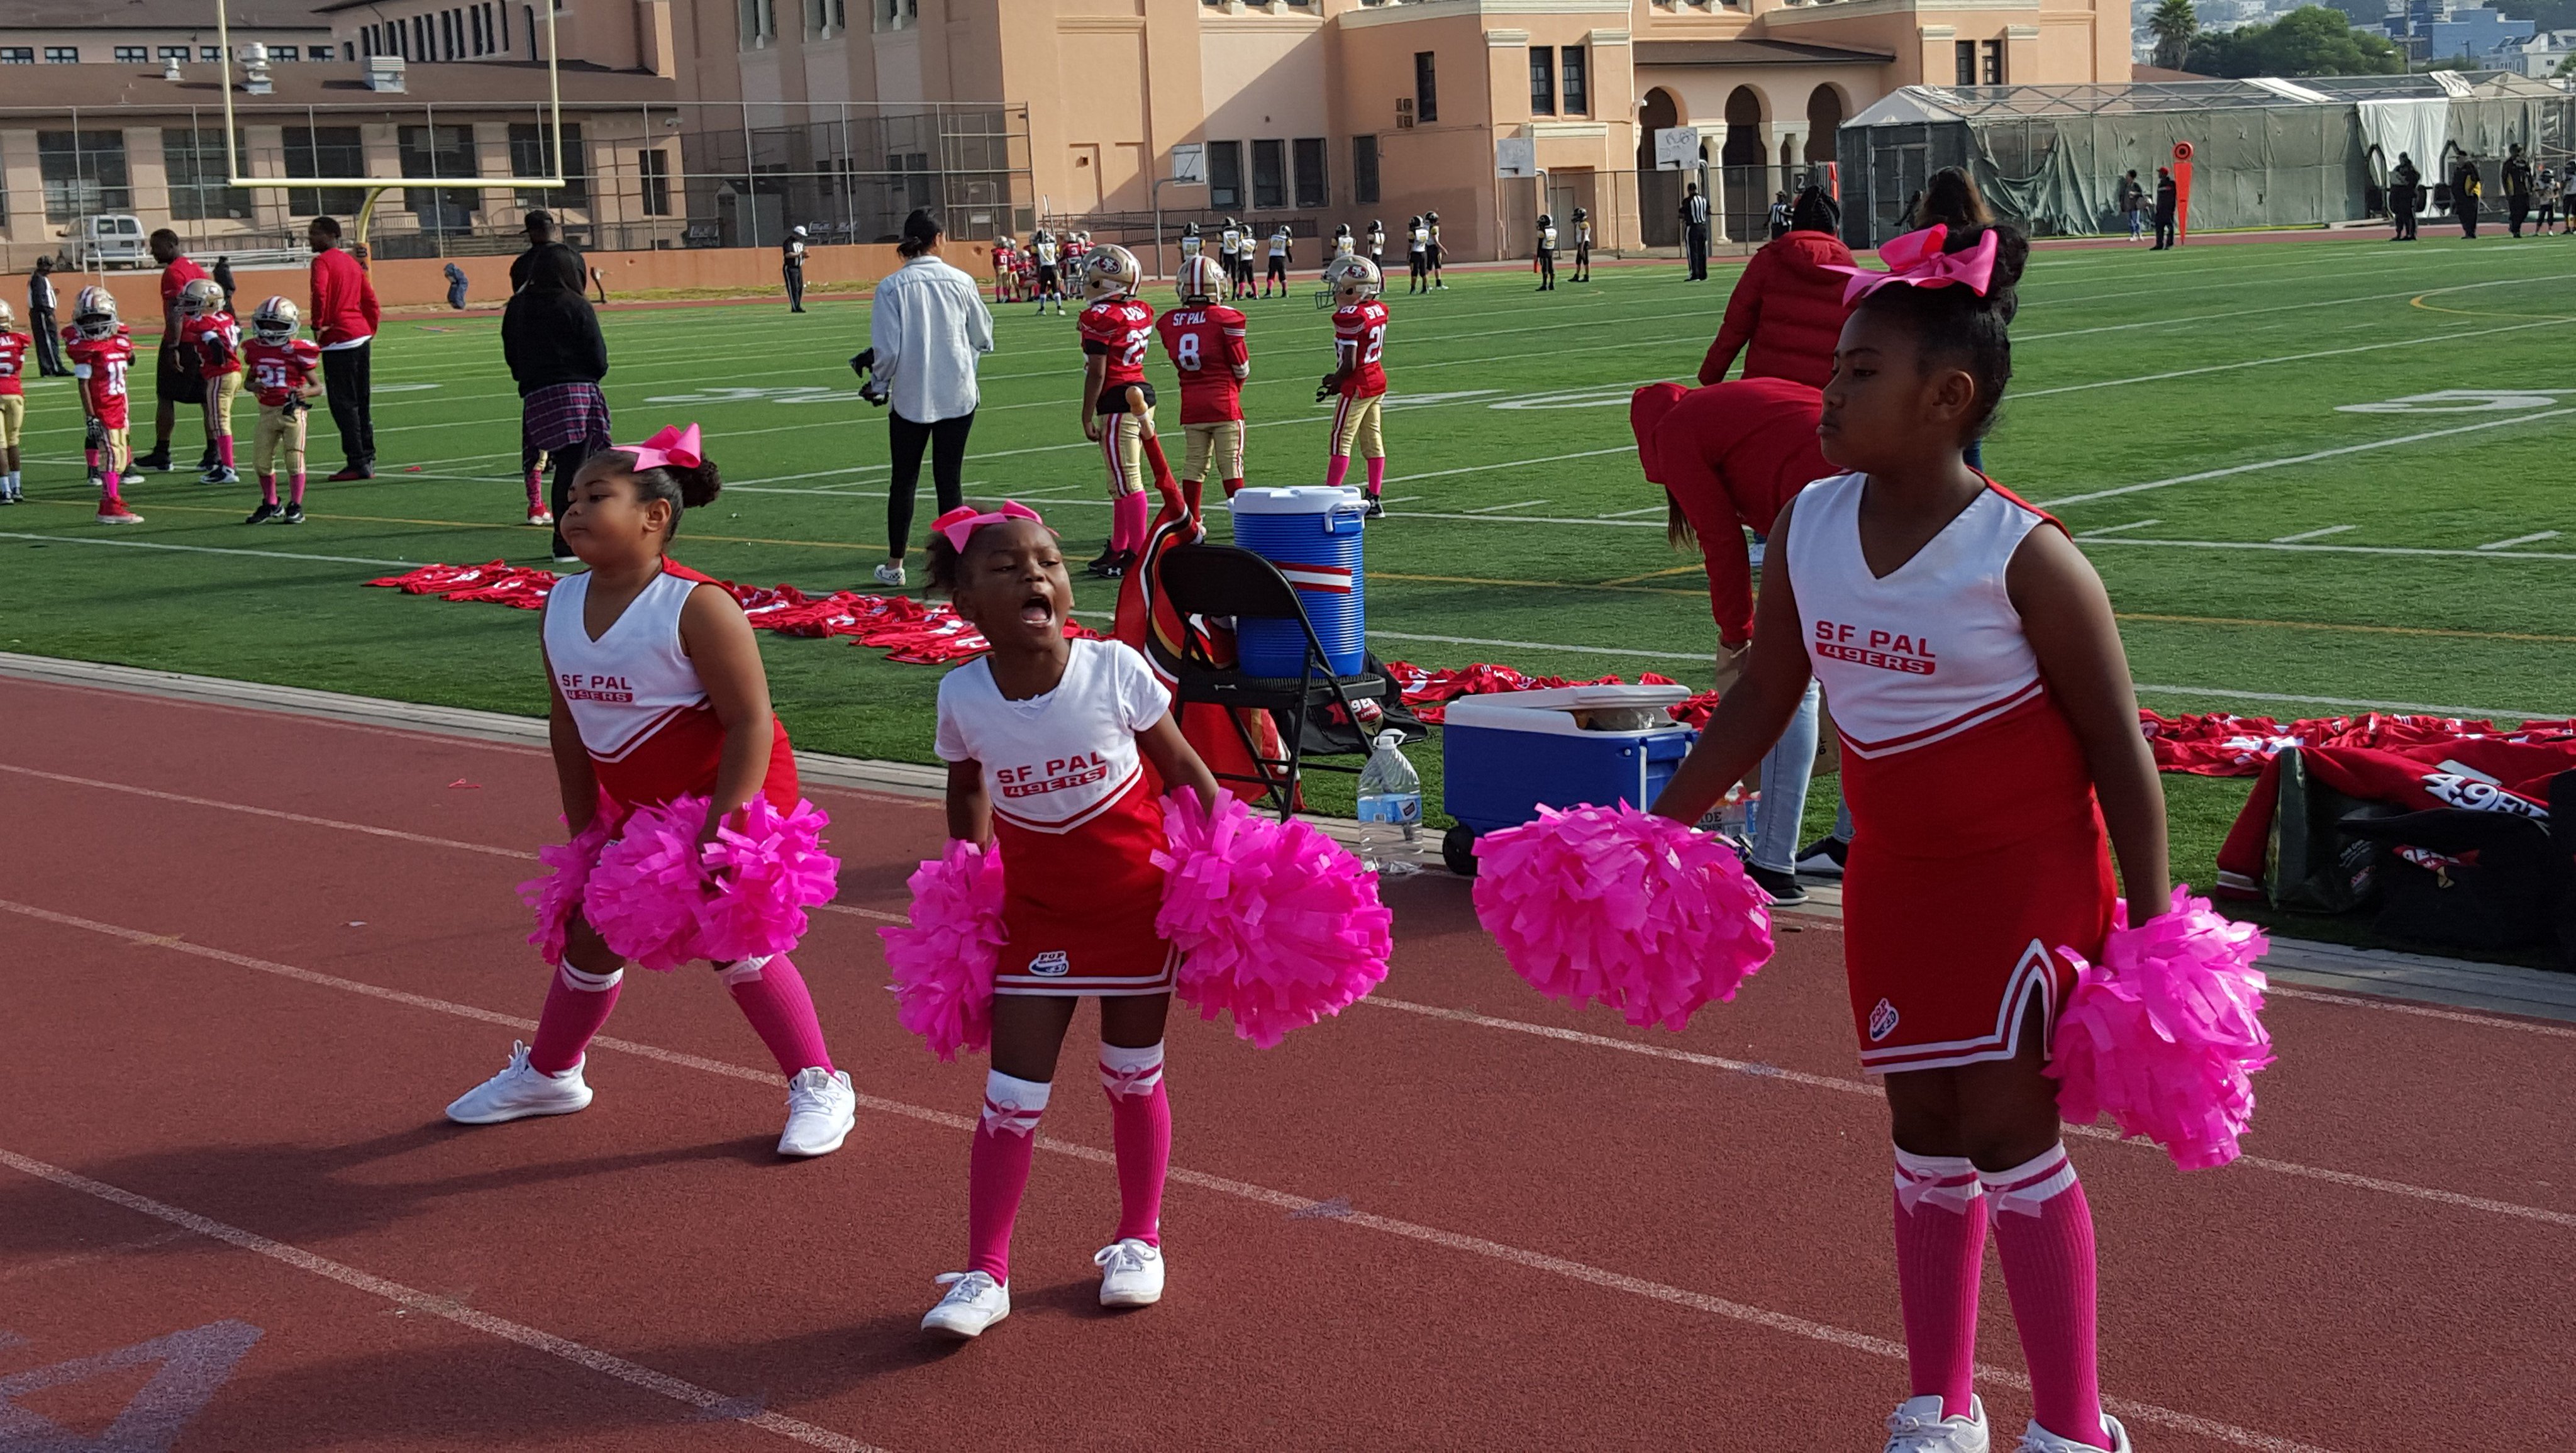 HS football teams showed support during pink October